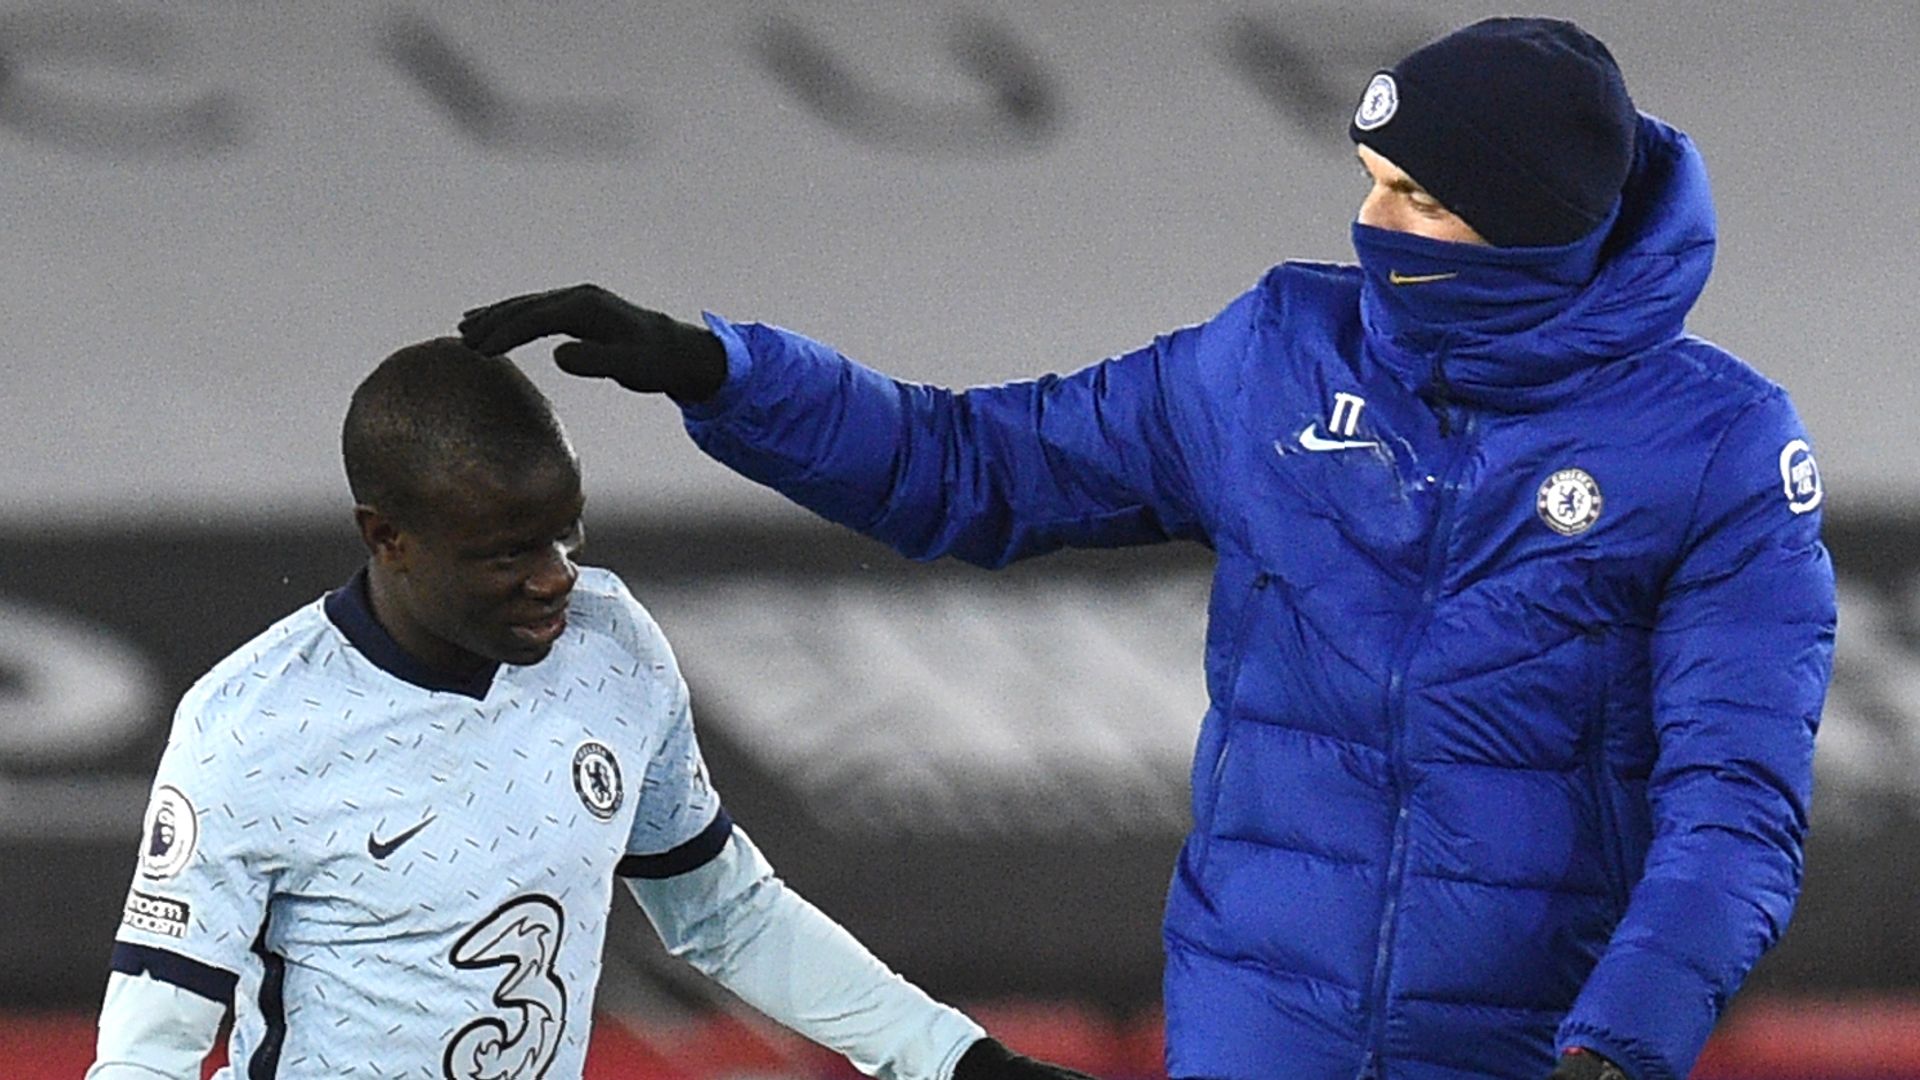 Tuchel: It's a gift to coach Kante